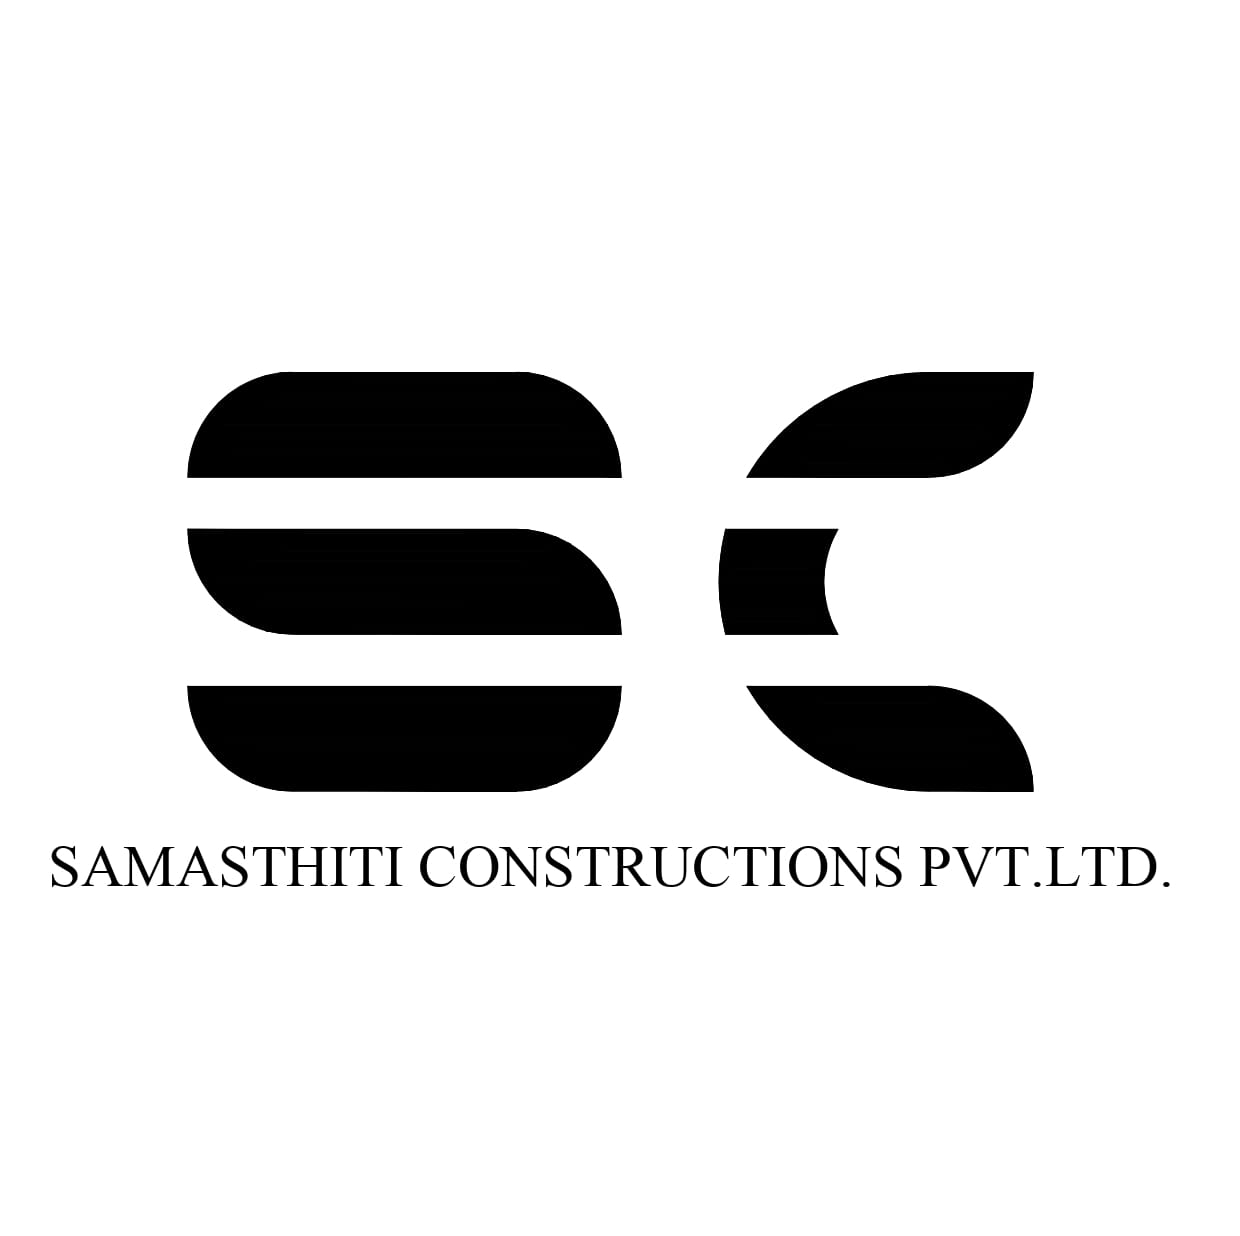 Samasthiti Constructions Pvt.Ltd|Legal Services|Professional Services